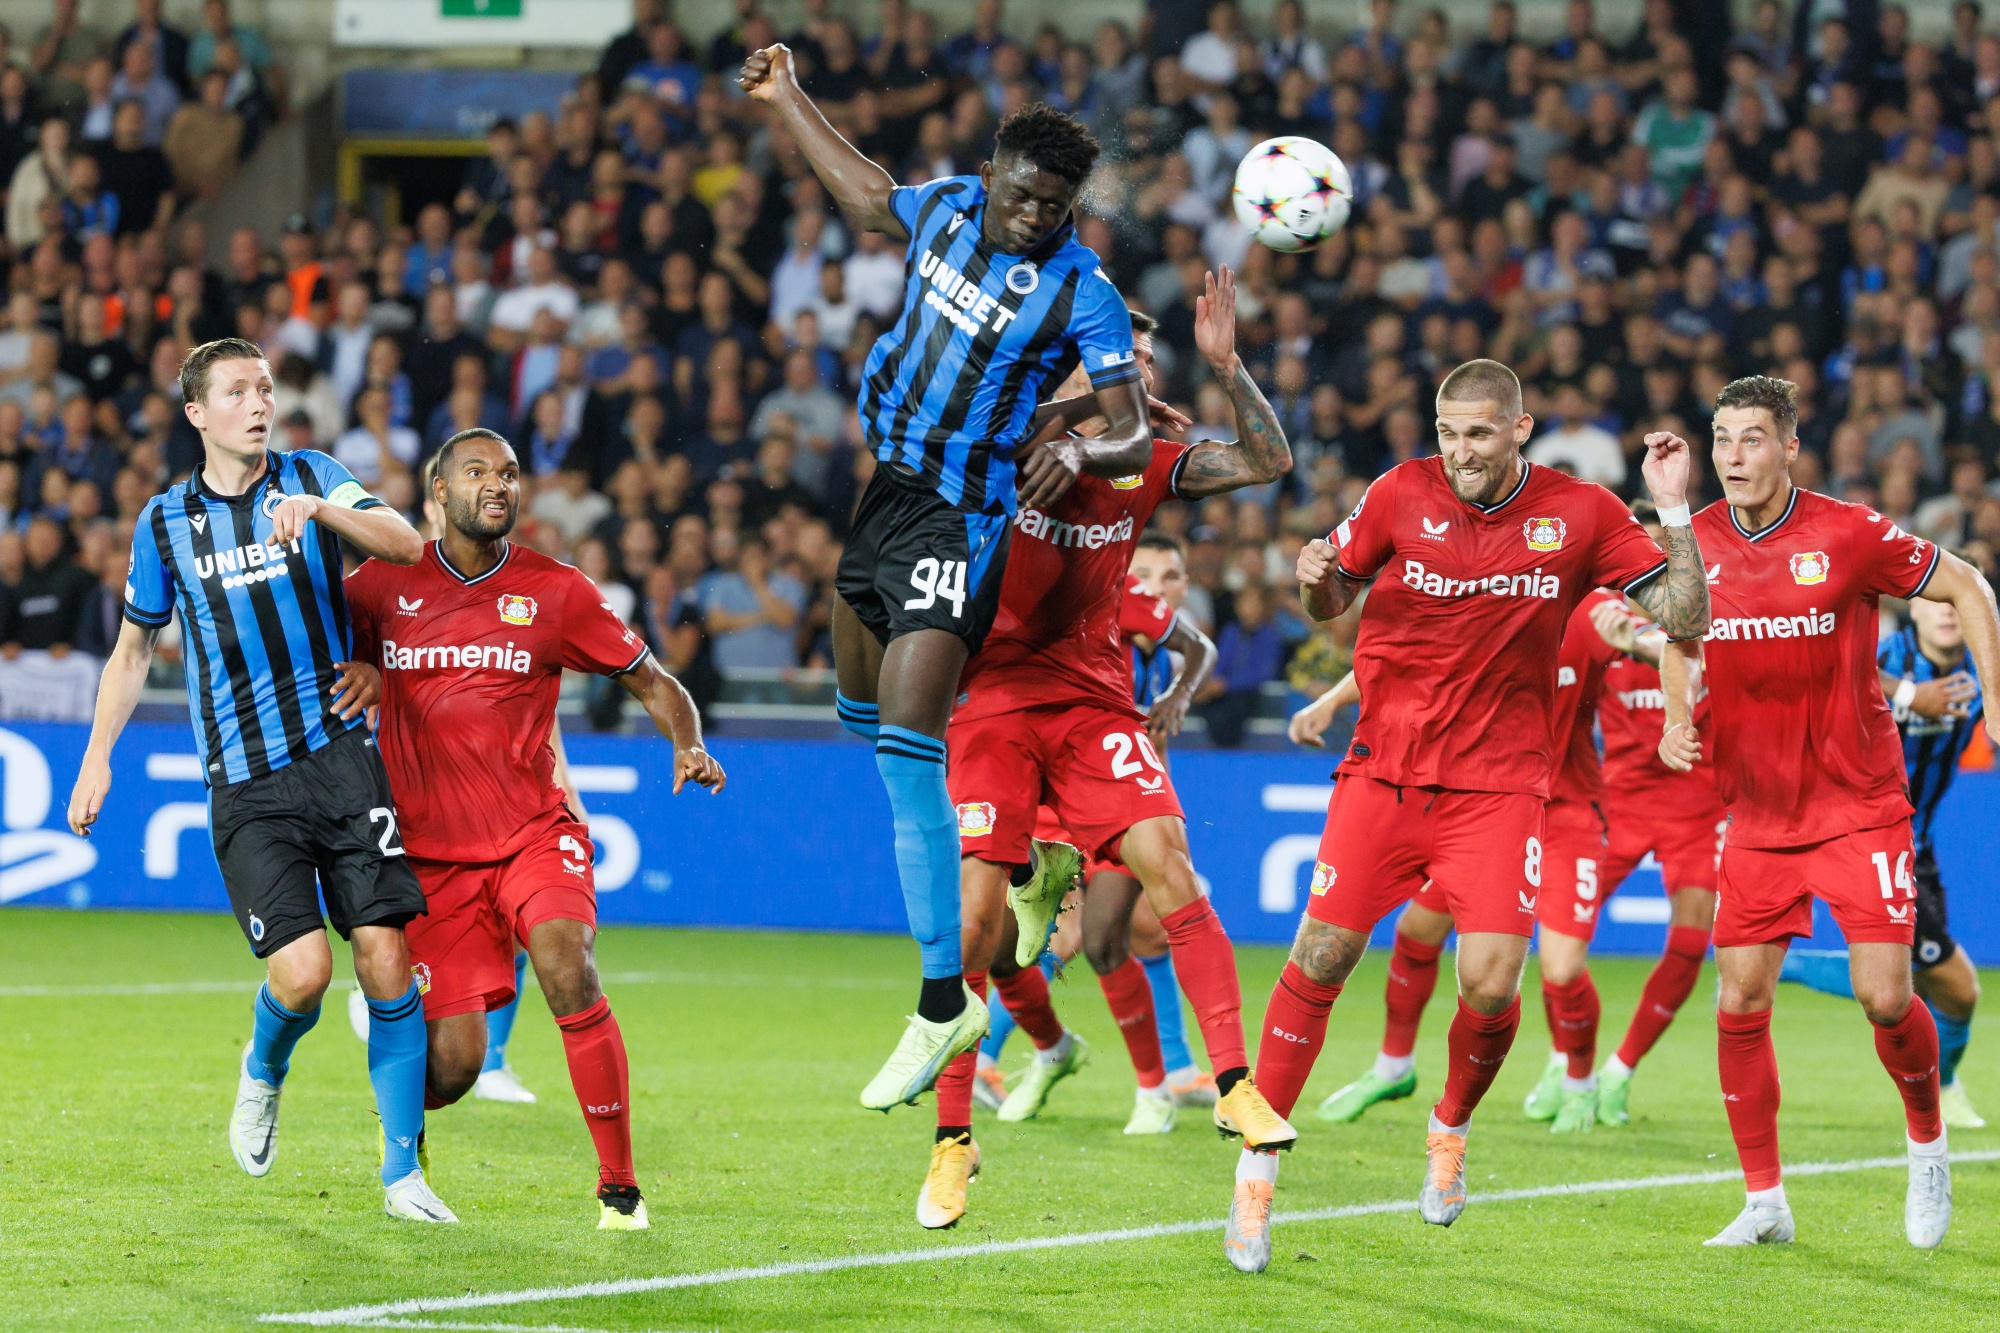 Club's Abakar Sylla scores a goal during a soccer game beteen Belgian Club Brugge KV and German Bayer 04 Leverkusen, Wednesday 07 September 2022 in Brugge, on the opening day of the group stage of the UEFA Champions League tournament. BELGA PHOTO KURT DESPLENTER